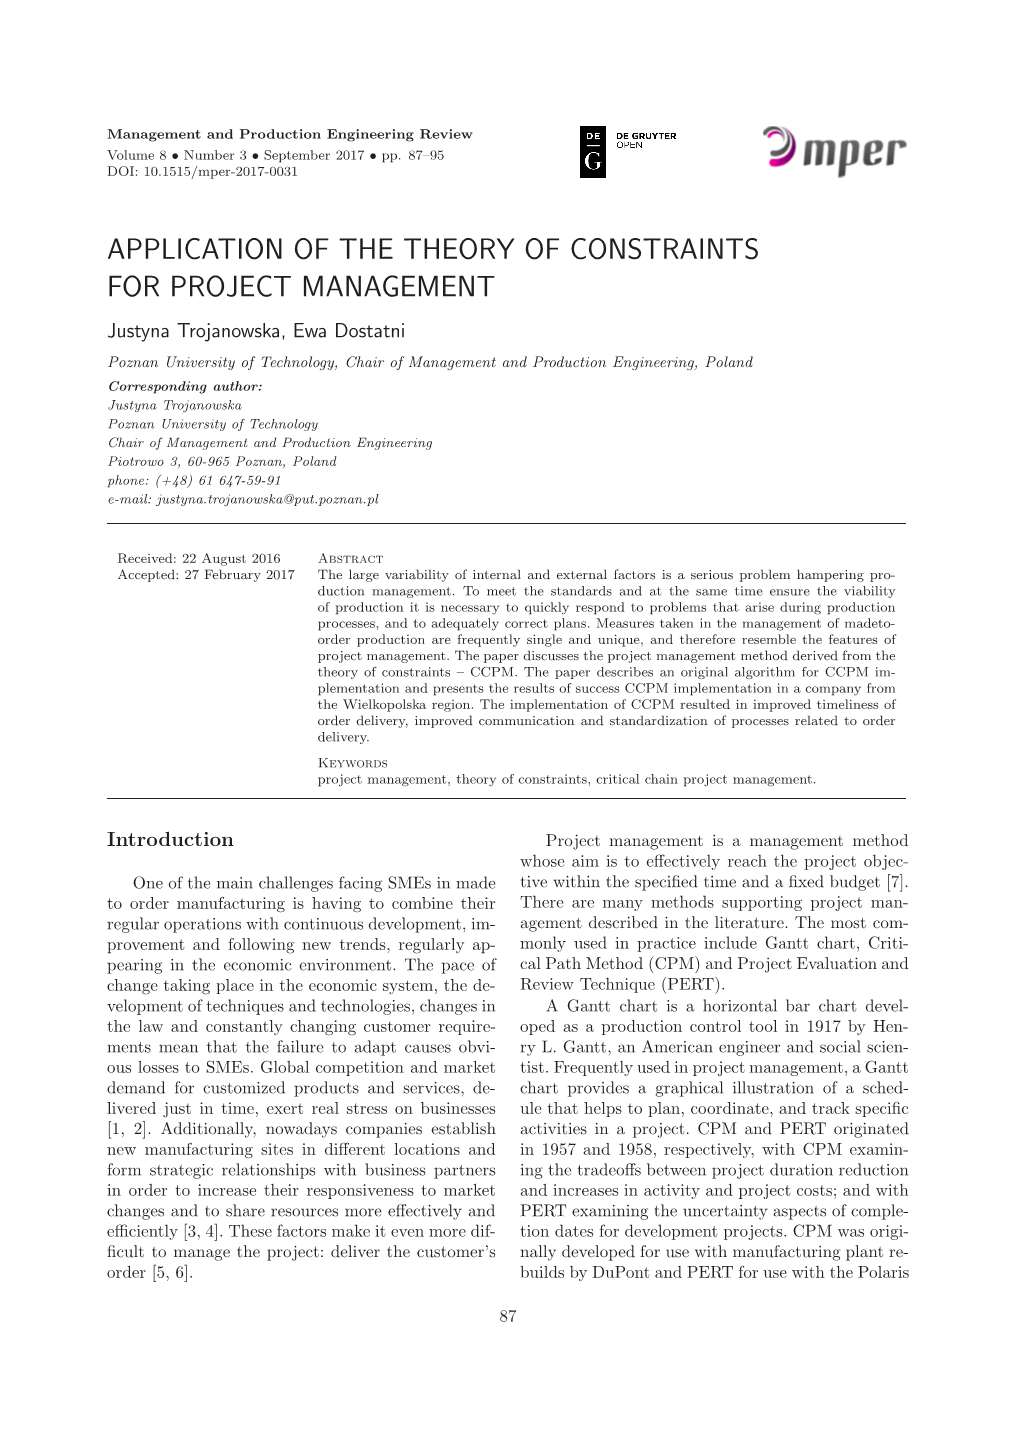 Application of the Theory of Constraints for Project Management